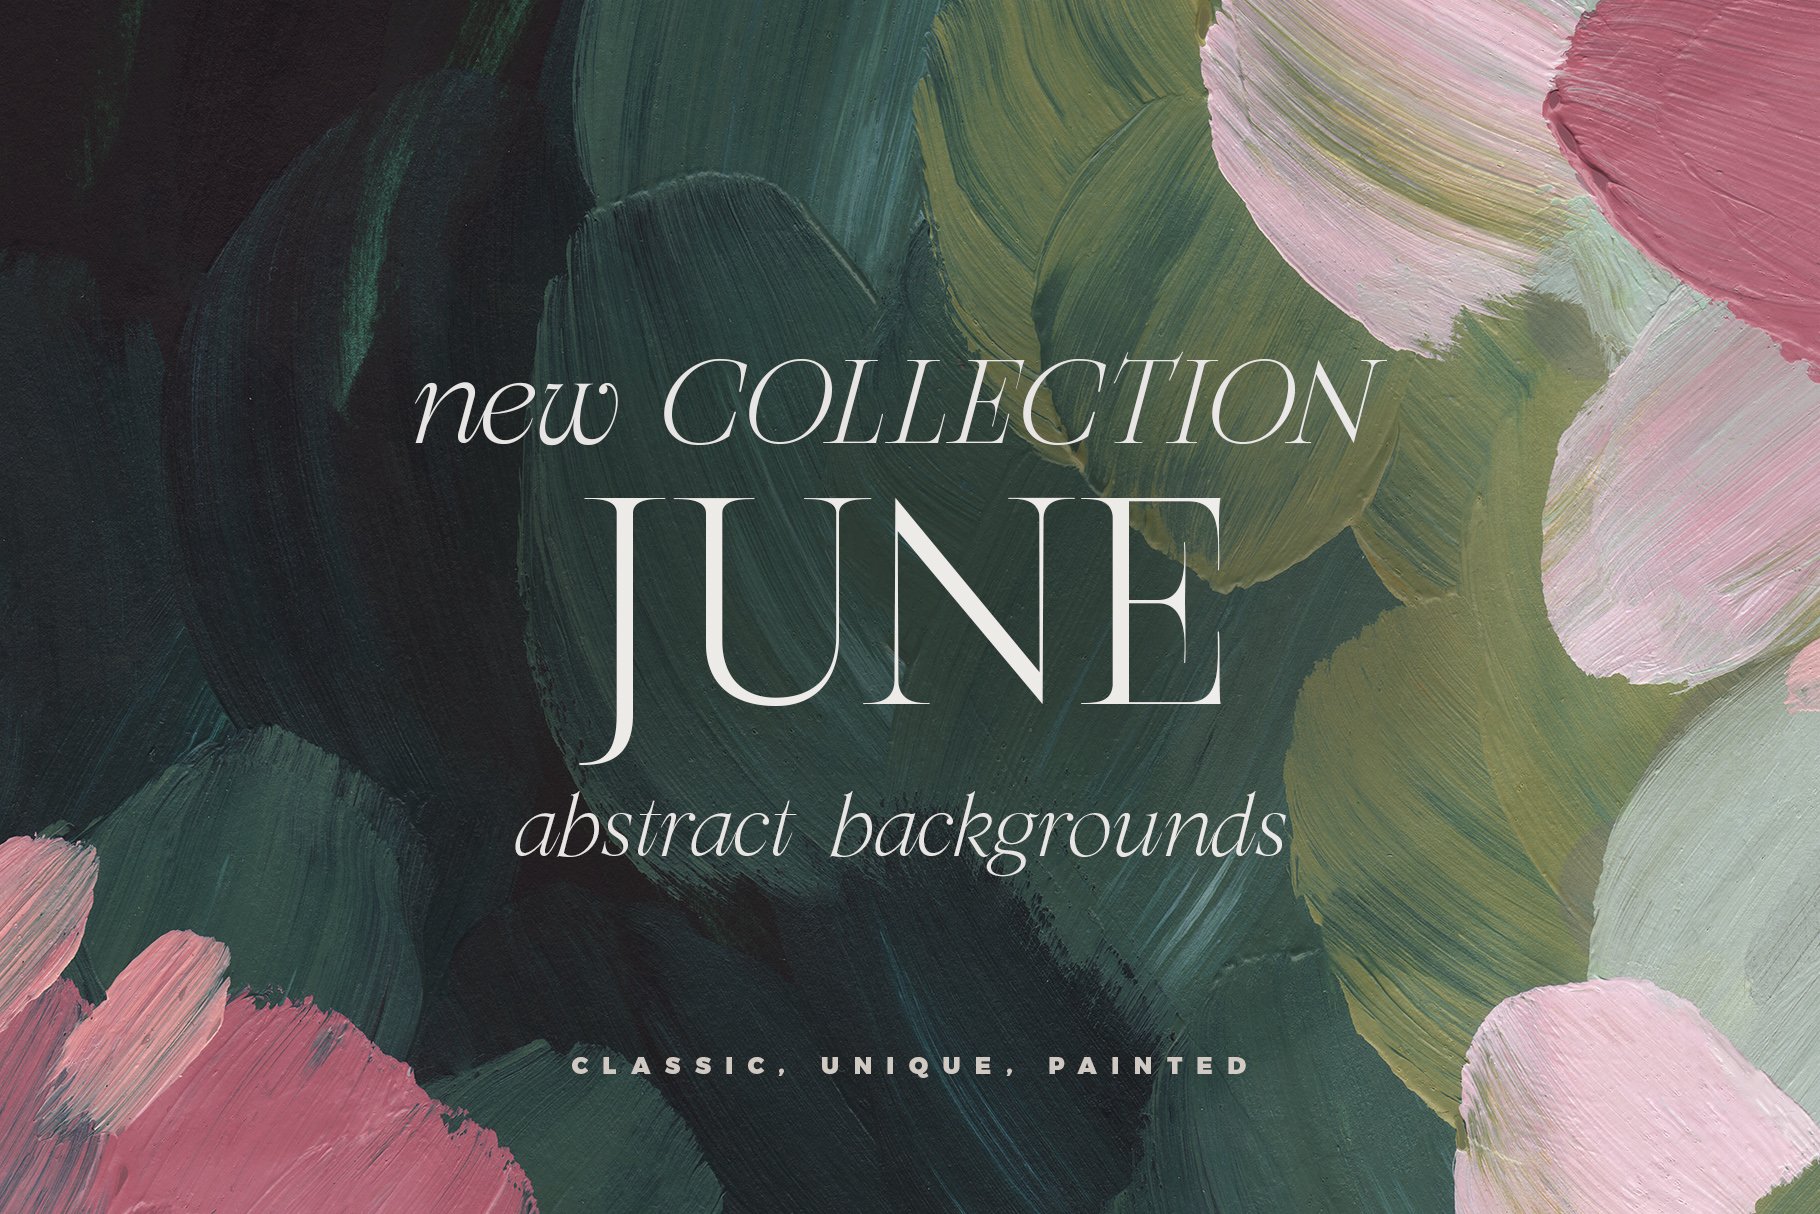 June - Abstract Painted Backgrounds cover image.